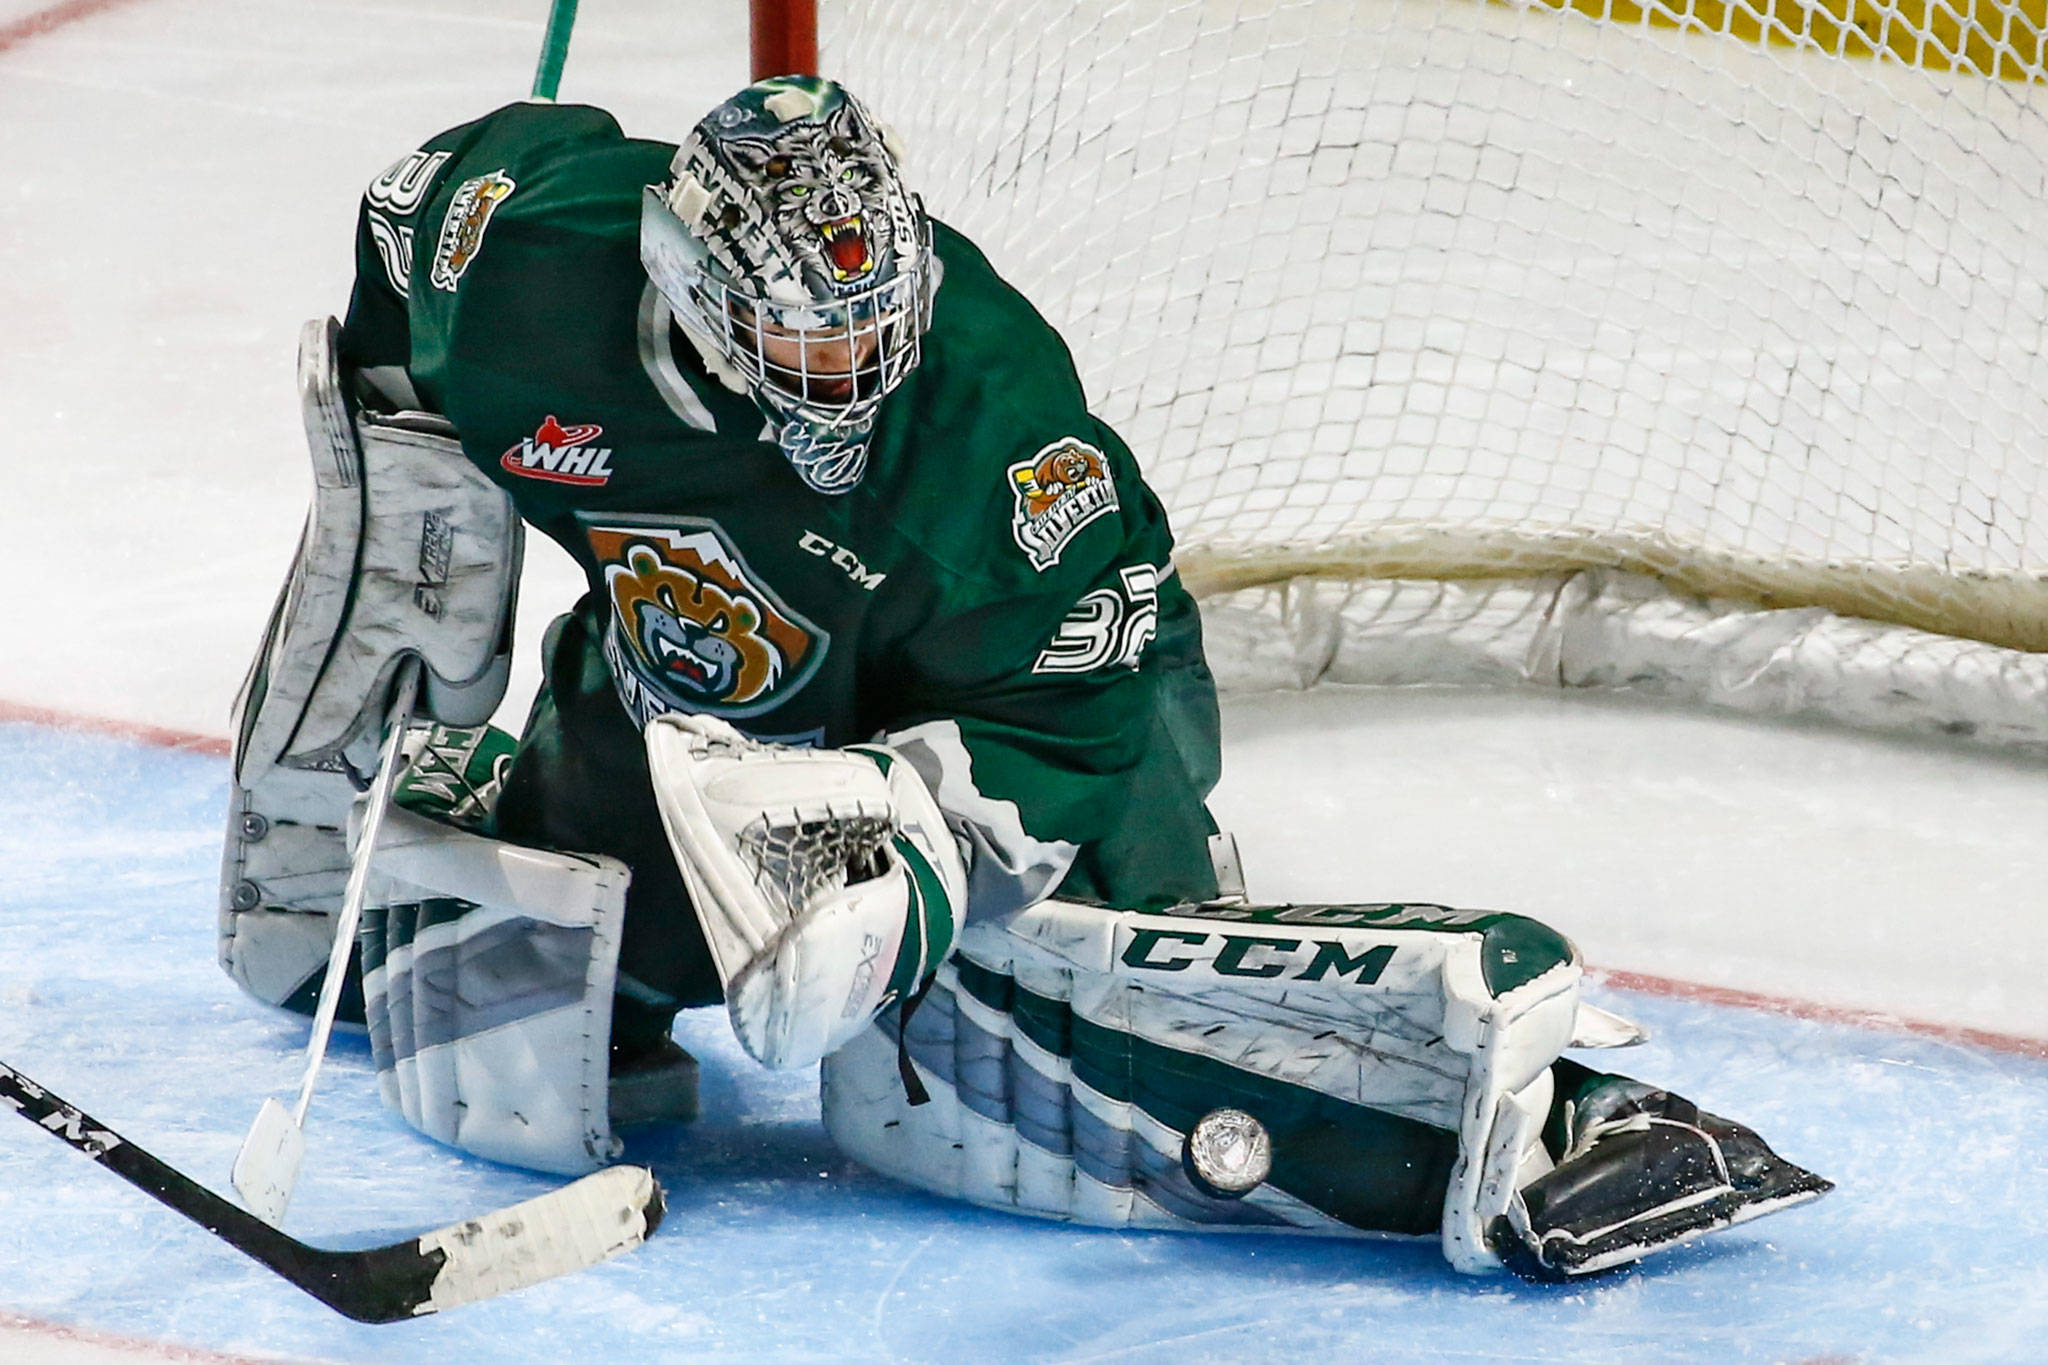 Everett goaltender Dustin Wolf stops a shot during a WHL game against the Seattle Thunderbirds on March 8 at ShoWare Center in Kent. (Kevin Clark/The Herald)